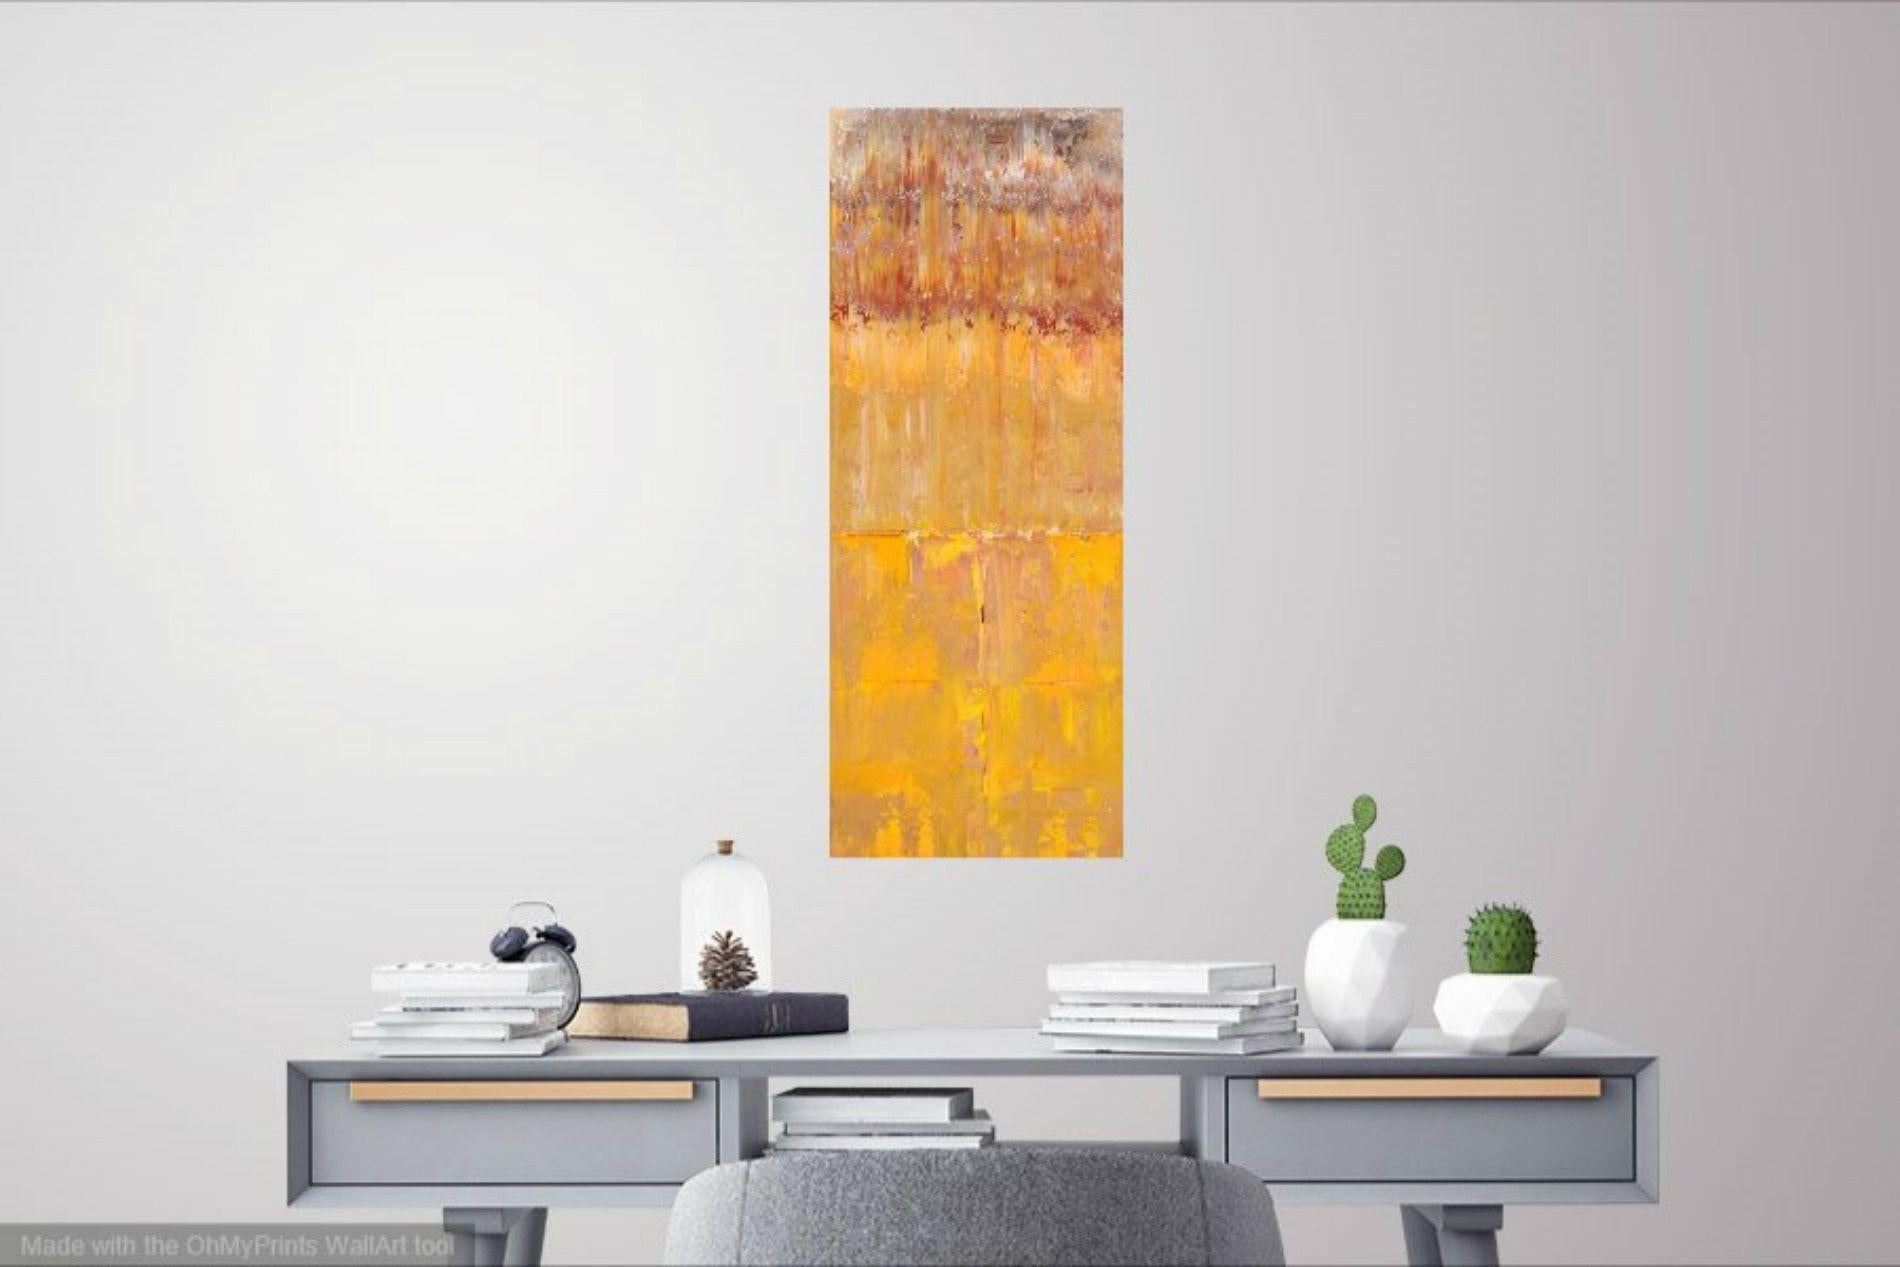 (Oct. 2018) Abstract Acrylic Painting. Use of Gallery Wrapped Cotton Canvas 16 x 40 x 1.5. (7 Layers) I like building my canvases with layers of paint. There is a richness by doing this for this painting and many of the paintings I paint. In this